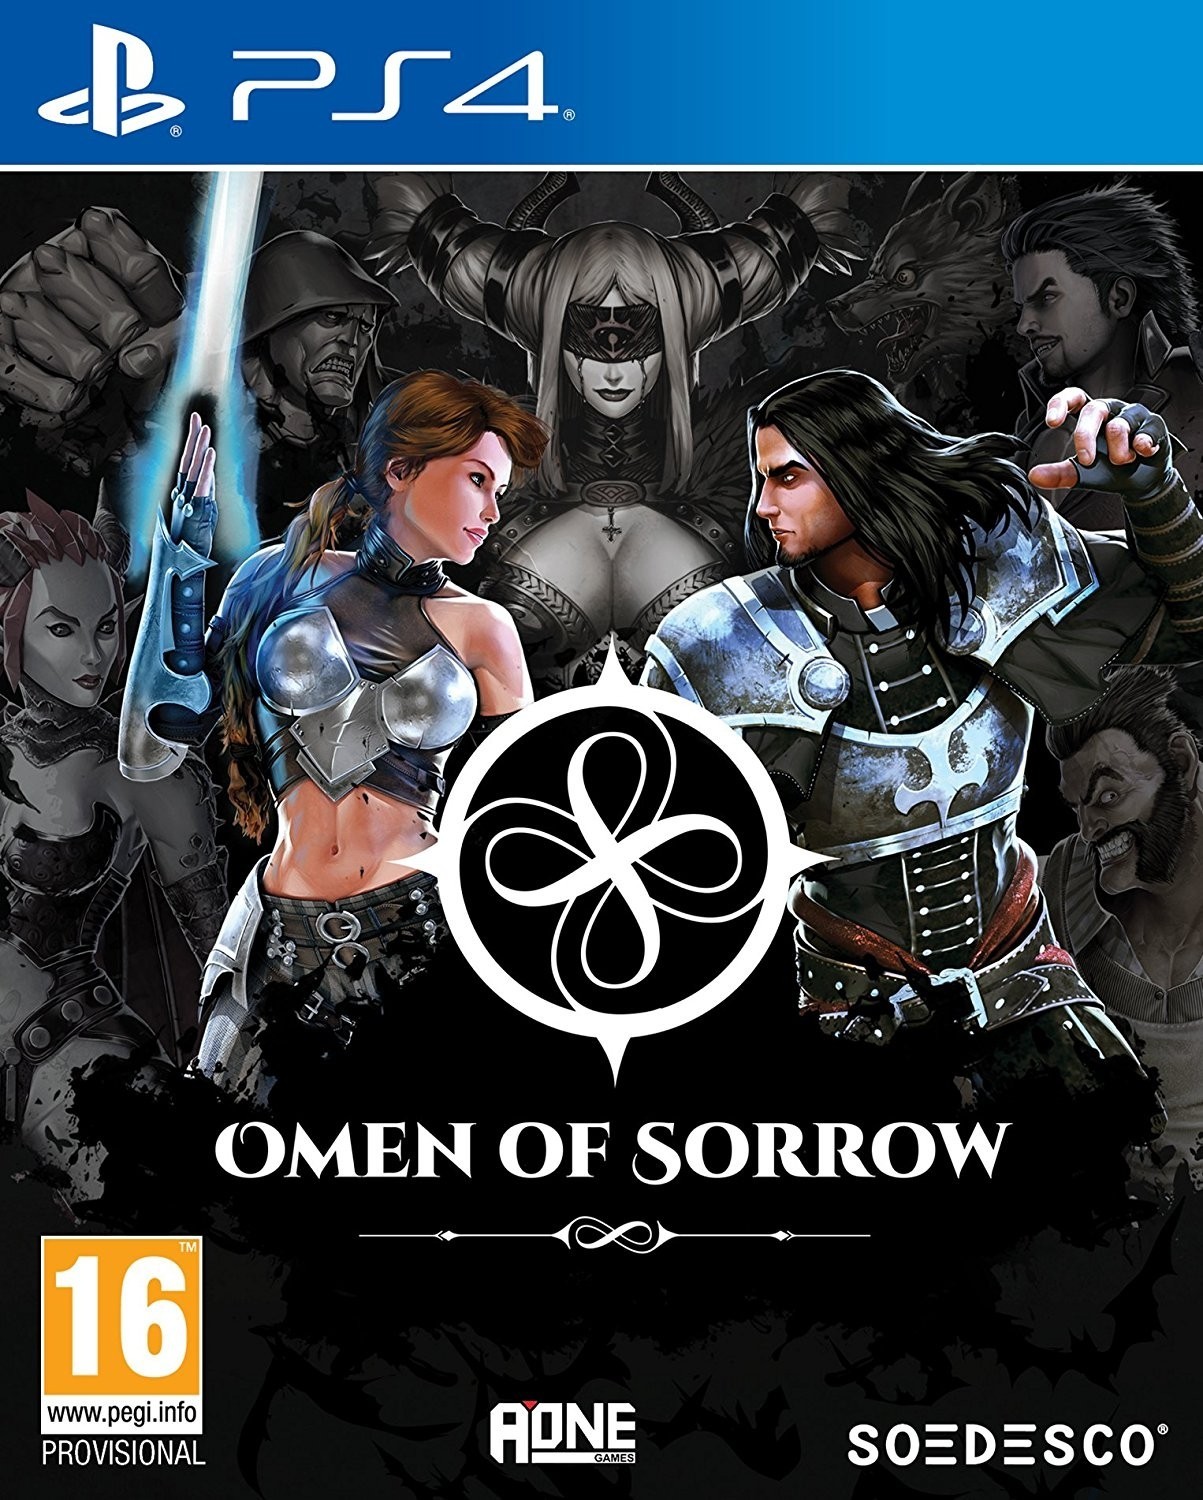 Omen of Sorrow (PS4), AOne Games